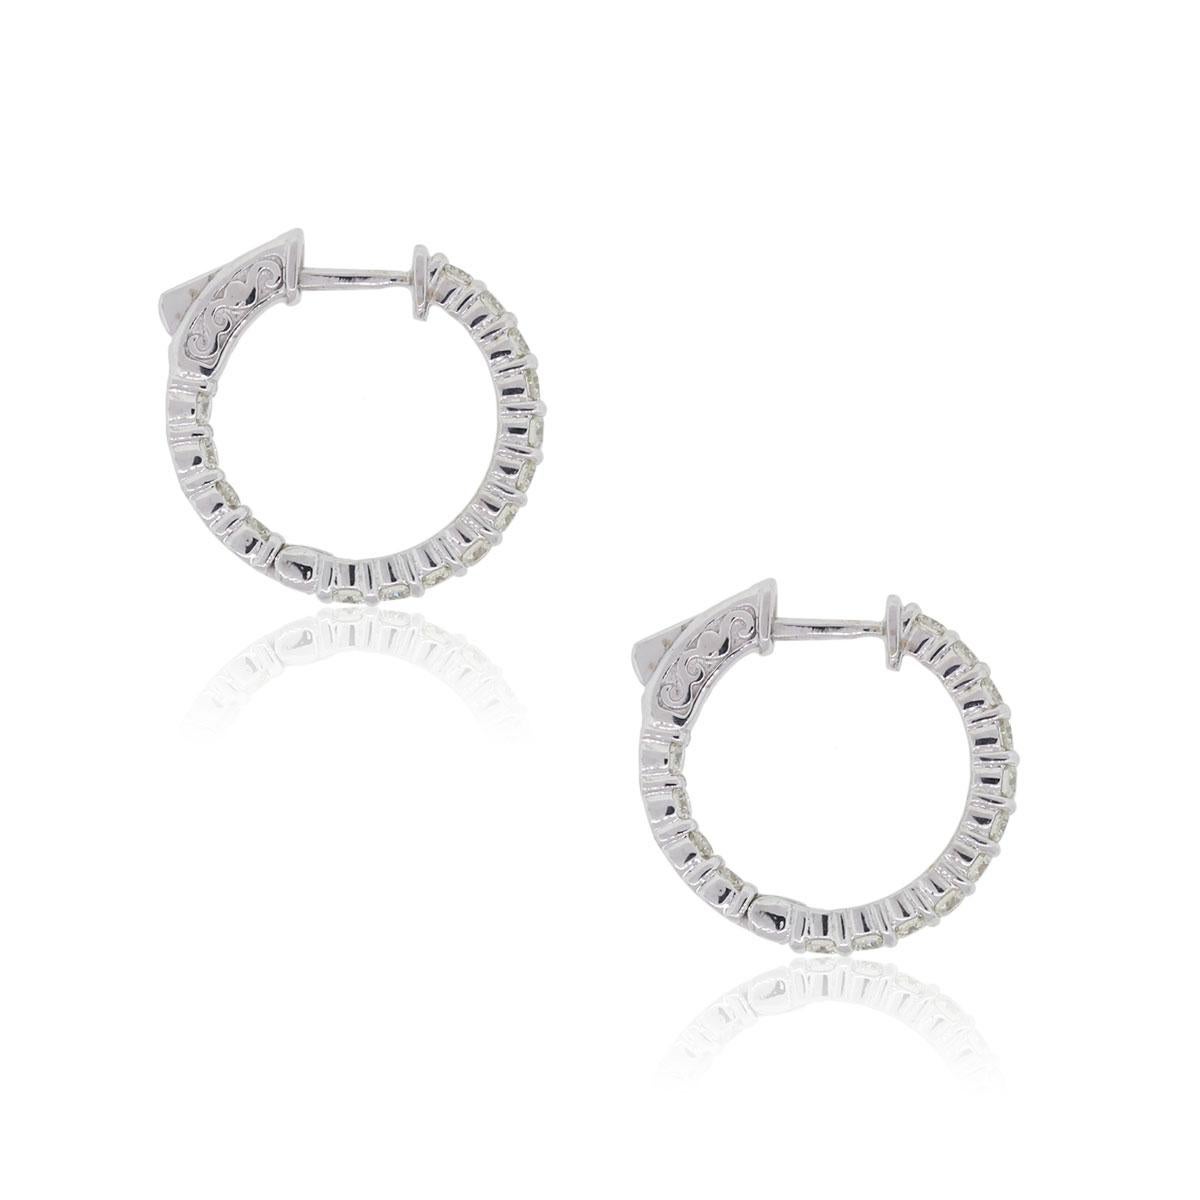 Material: 14k white gold
Diamond Details: Approximately 1.41ctw of round brilliant diamonds. Diamonds are G/H in color and VS in clarity.
Measurements: 0.81″ x 0.12″ x 0.79″
Earring Backs: Hinged Backs
Item Weight: 5.2g (3.4dwt)
Additional Details: